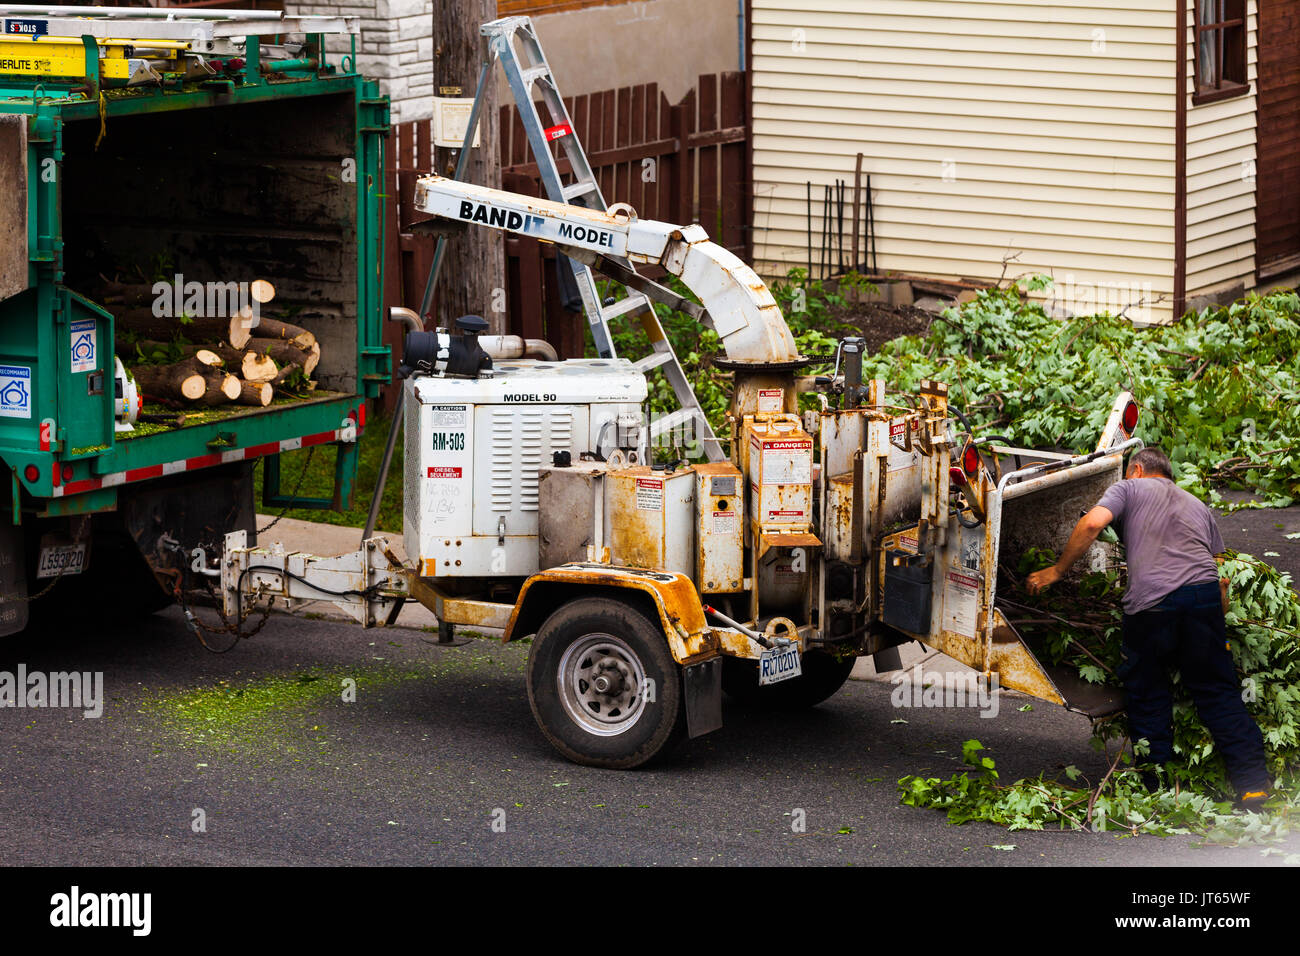 June 11th 2015, Montreal CANADA. Tree Shredder Machine in action and workers pushing Branches into it after cutting the Tree. Stock Photo